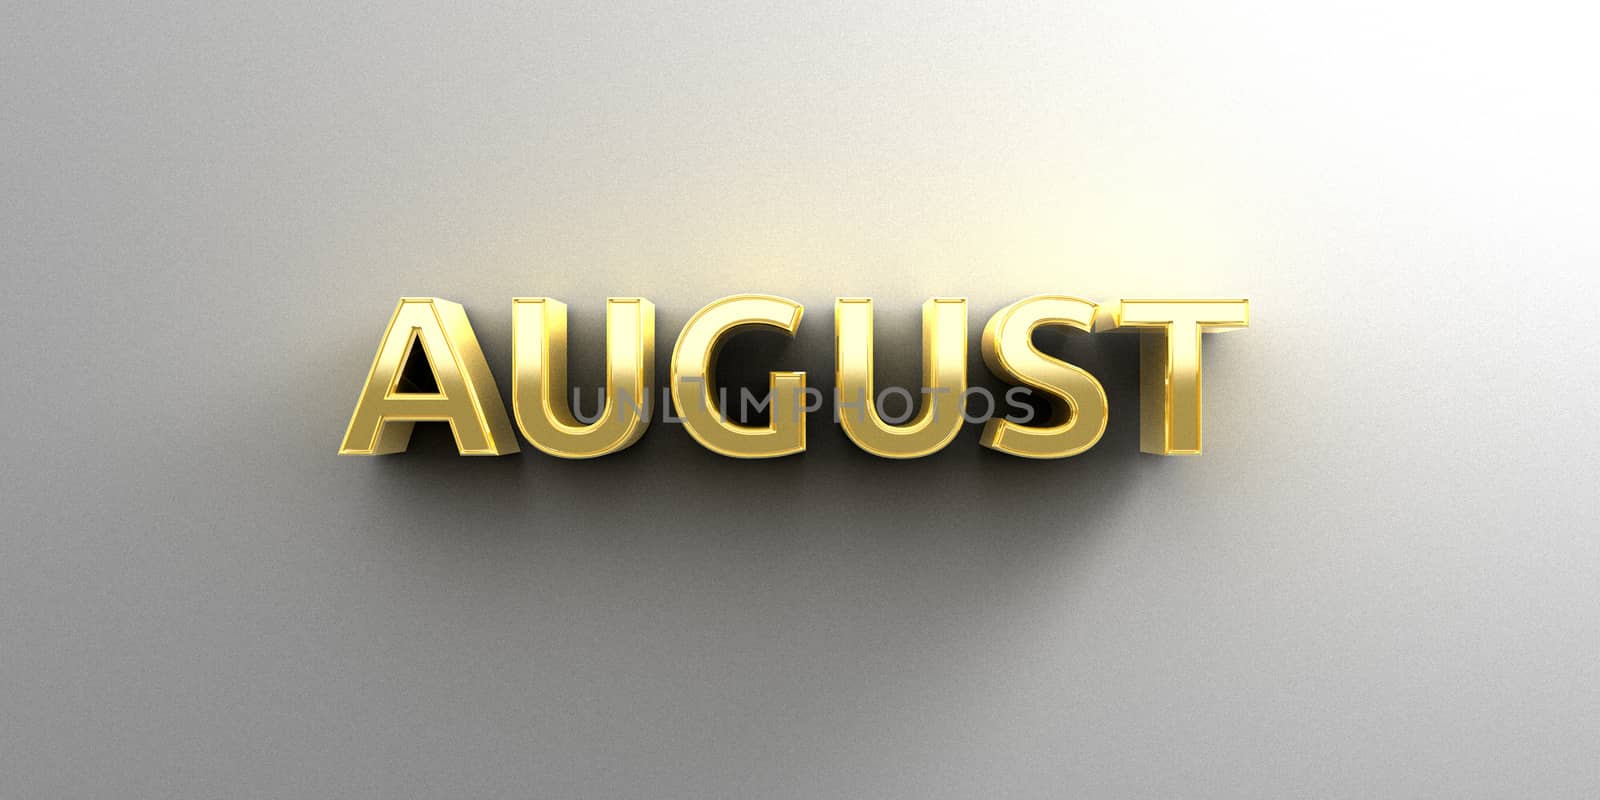 August month gold 3D quality render on the wall background with soft shadow.